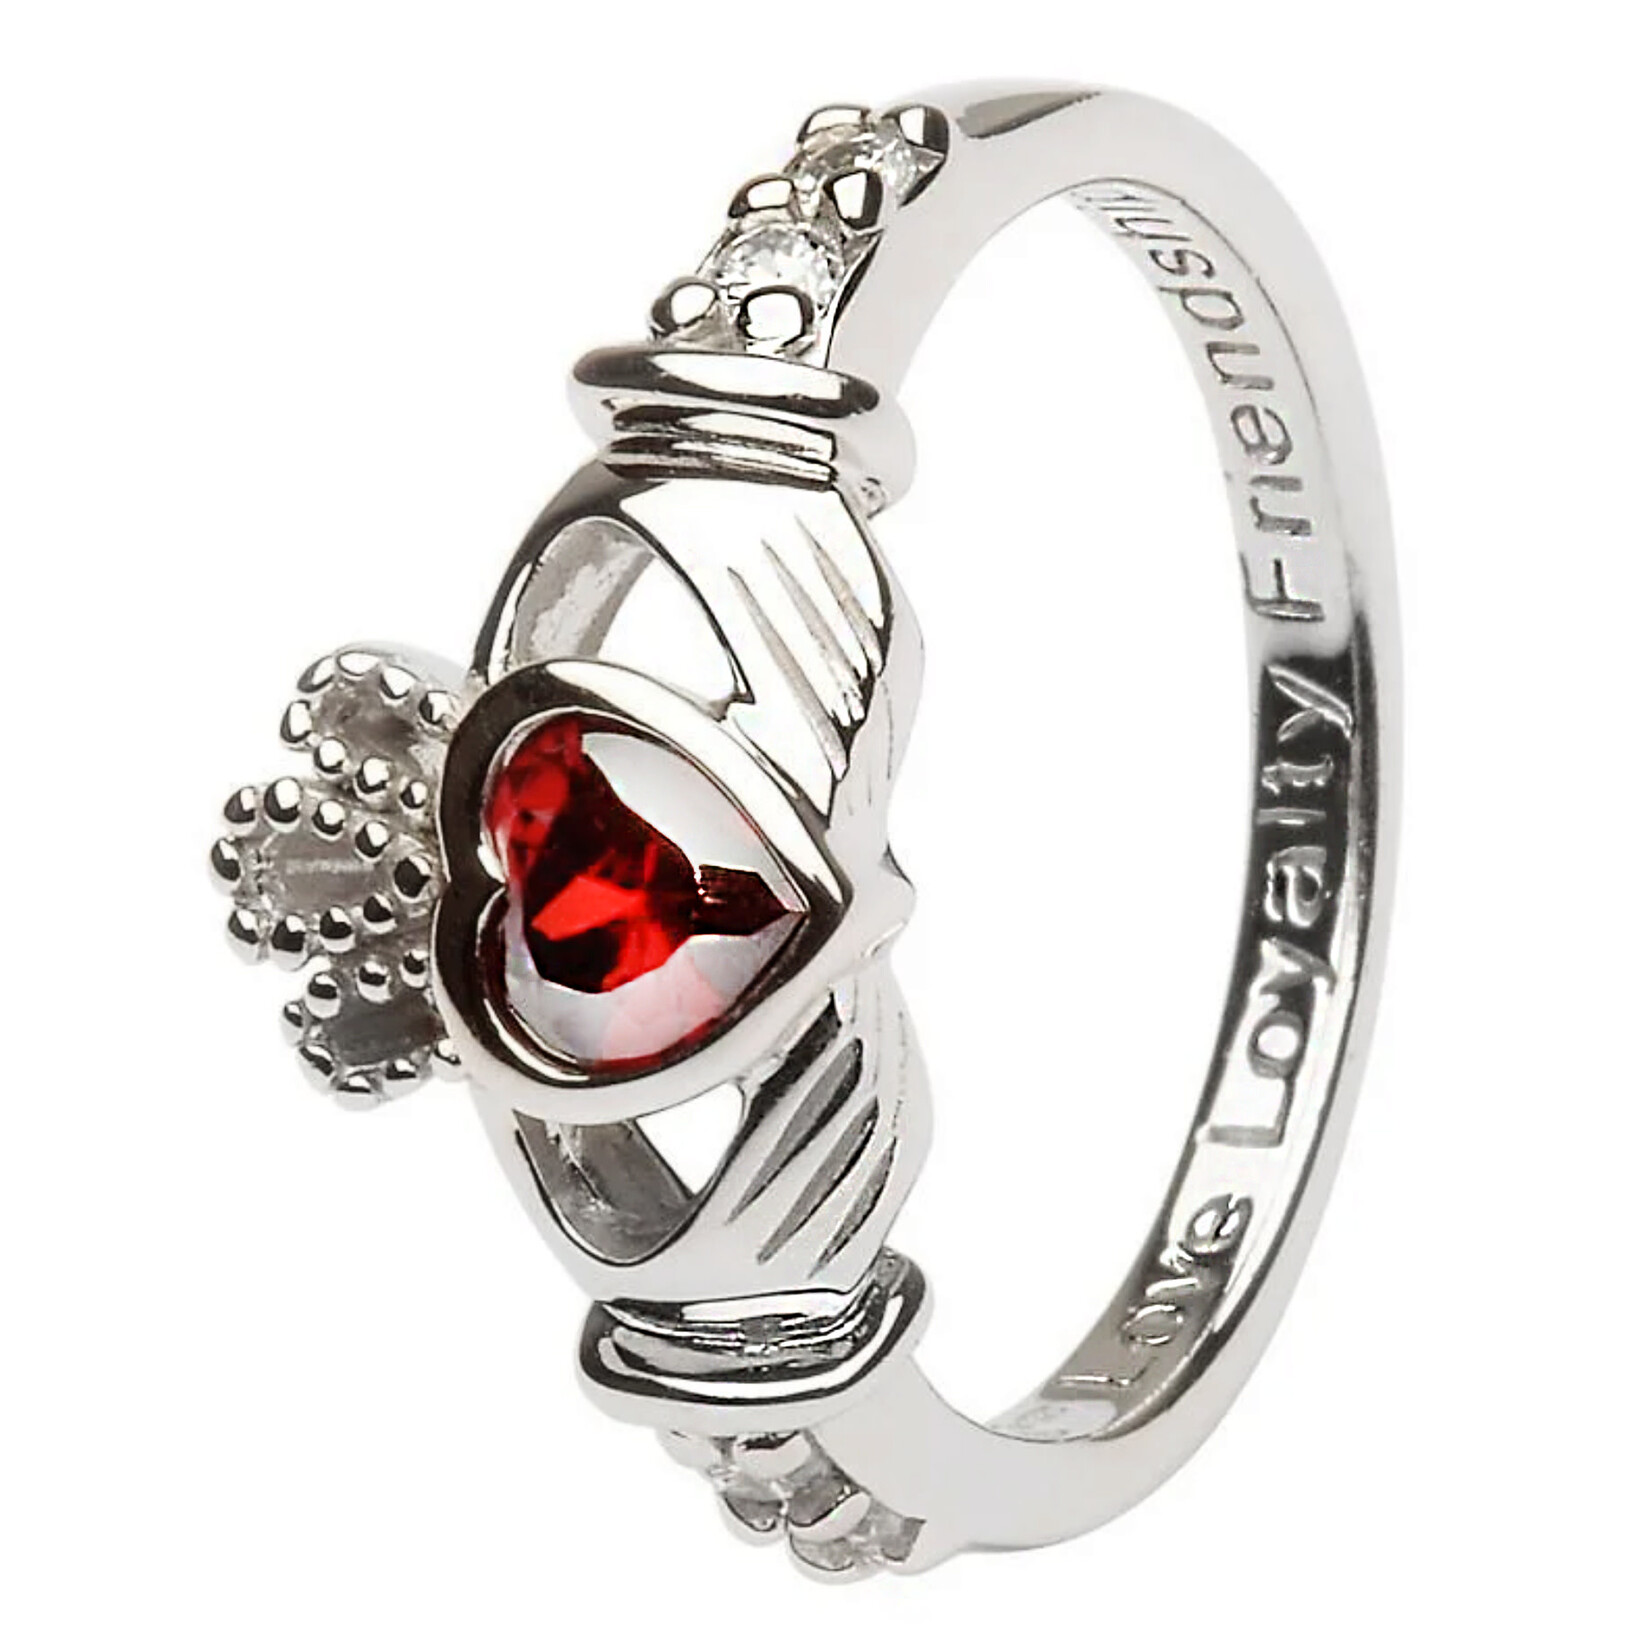 Shanore S/S January Birthstone Claddagh Ring